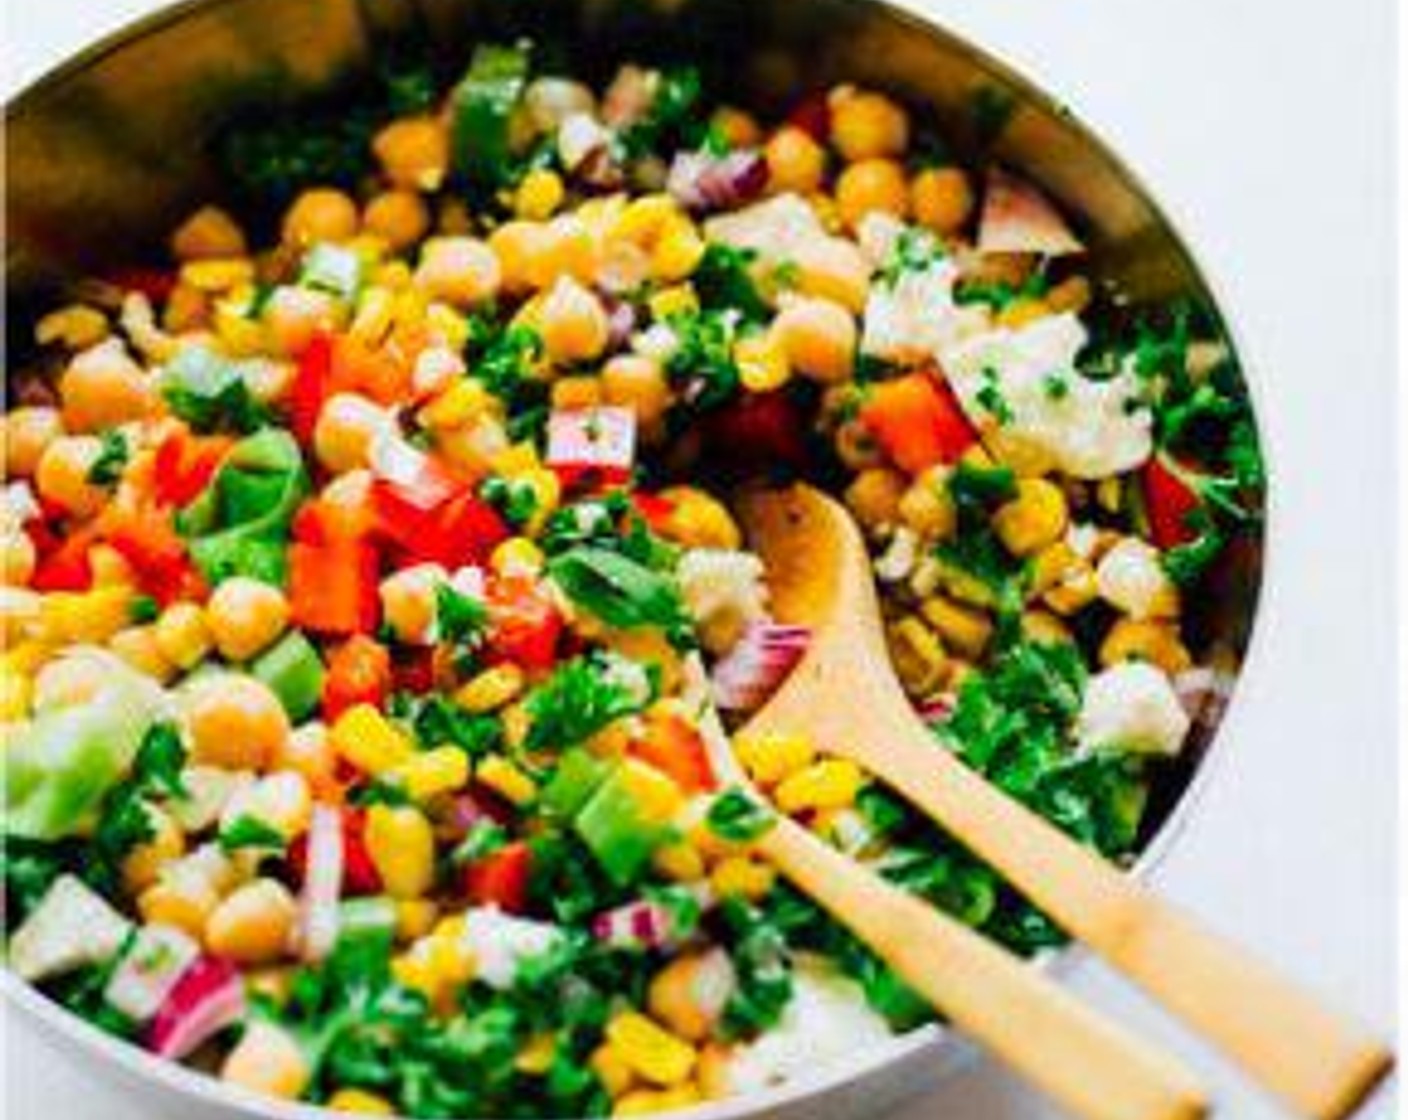 step 2 In a large bowl, toss together cooked corn, Canned Chickpeas (2 cups), Red Bell Pepper (1), Red Onion (1/4 cup), Scallion (1/2 cup), Fresh Parsley (1/2 cup), and Crumbled Feta Cheese (1/2 cup).